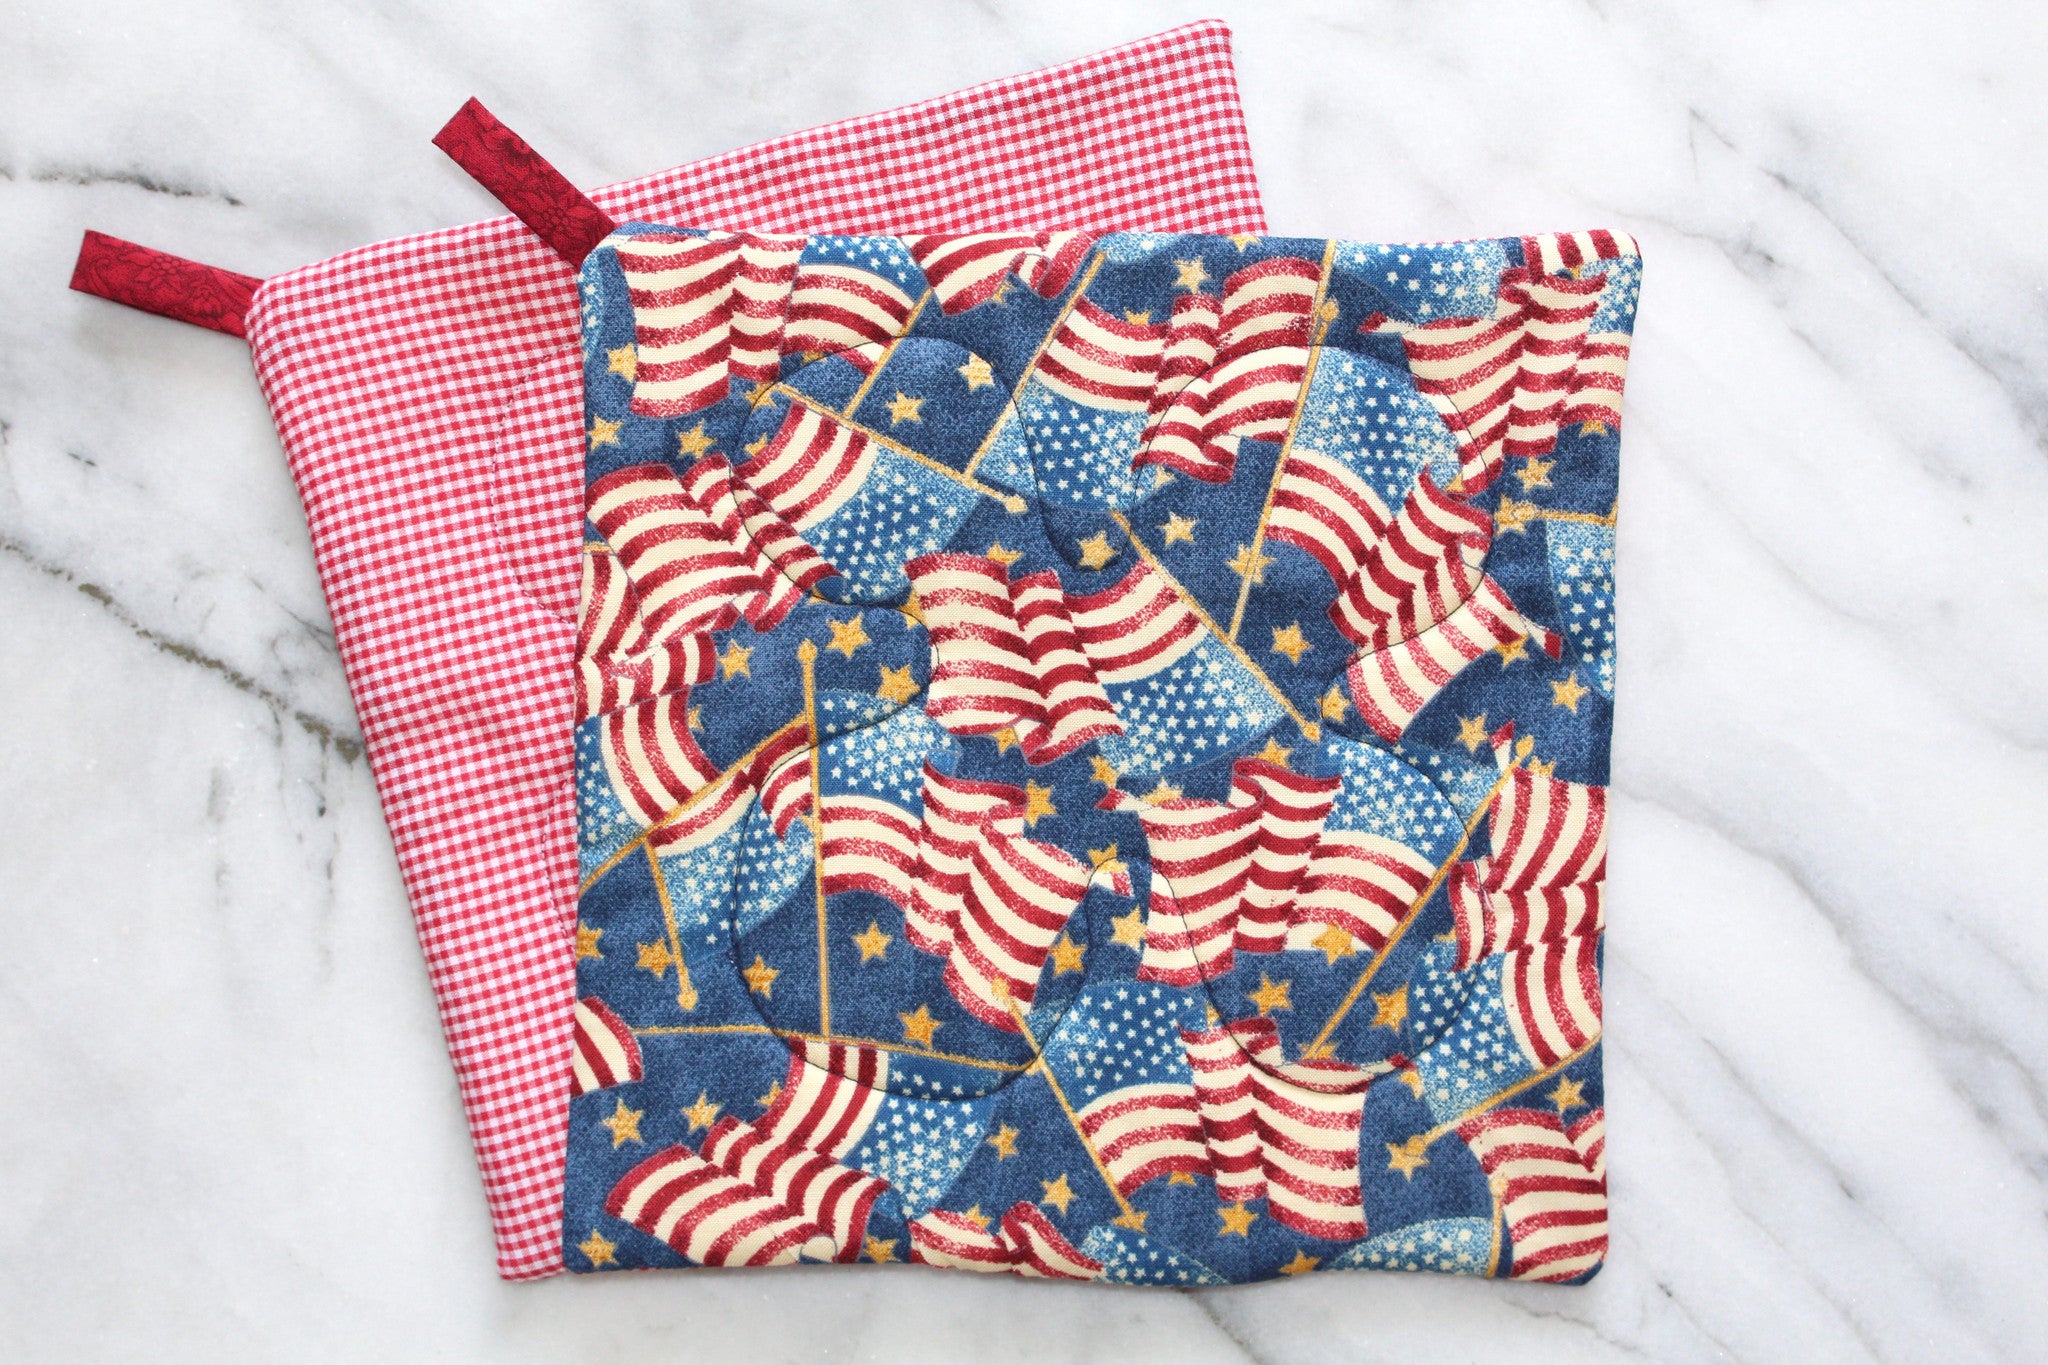 Star Spangled Potholder-The Blue Peony-Category_Pot Holder,Color_Blue,Color_Red,Department_Kitchen,Pattern_Gingham,Size_Traditional (Square),Theme_Summer